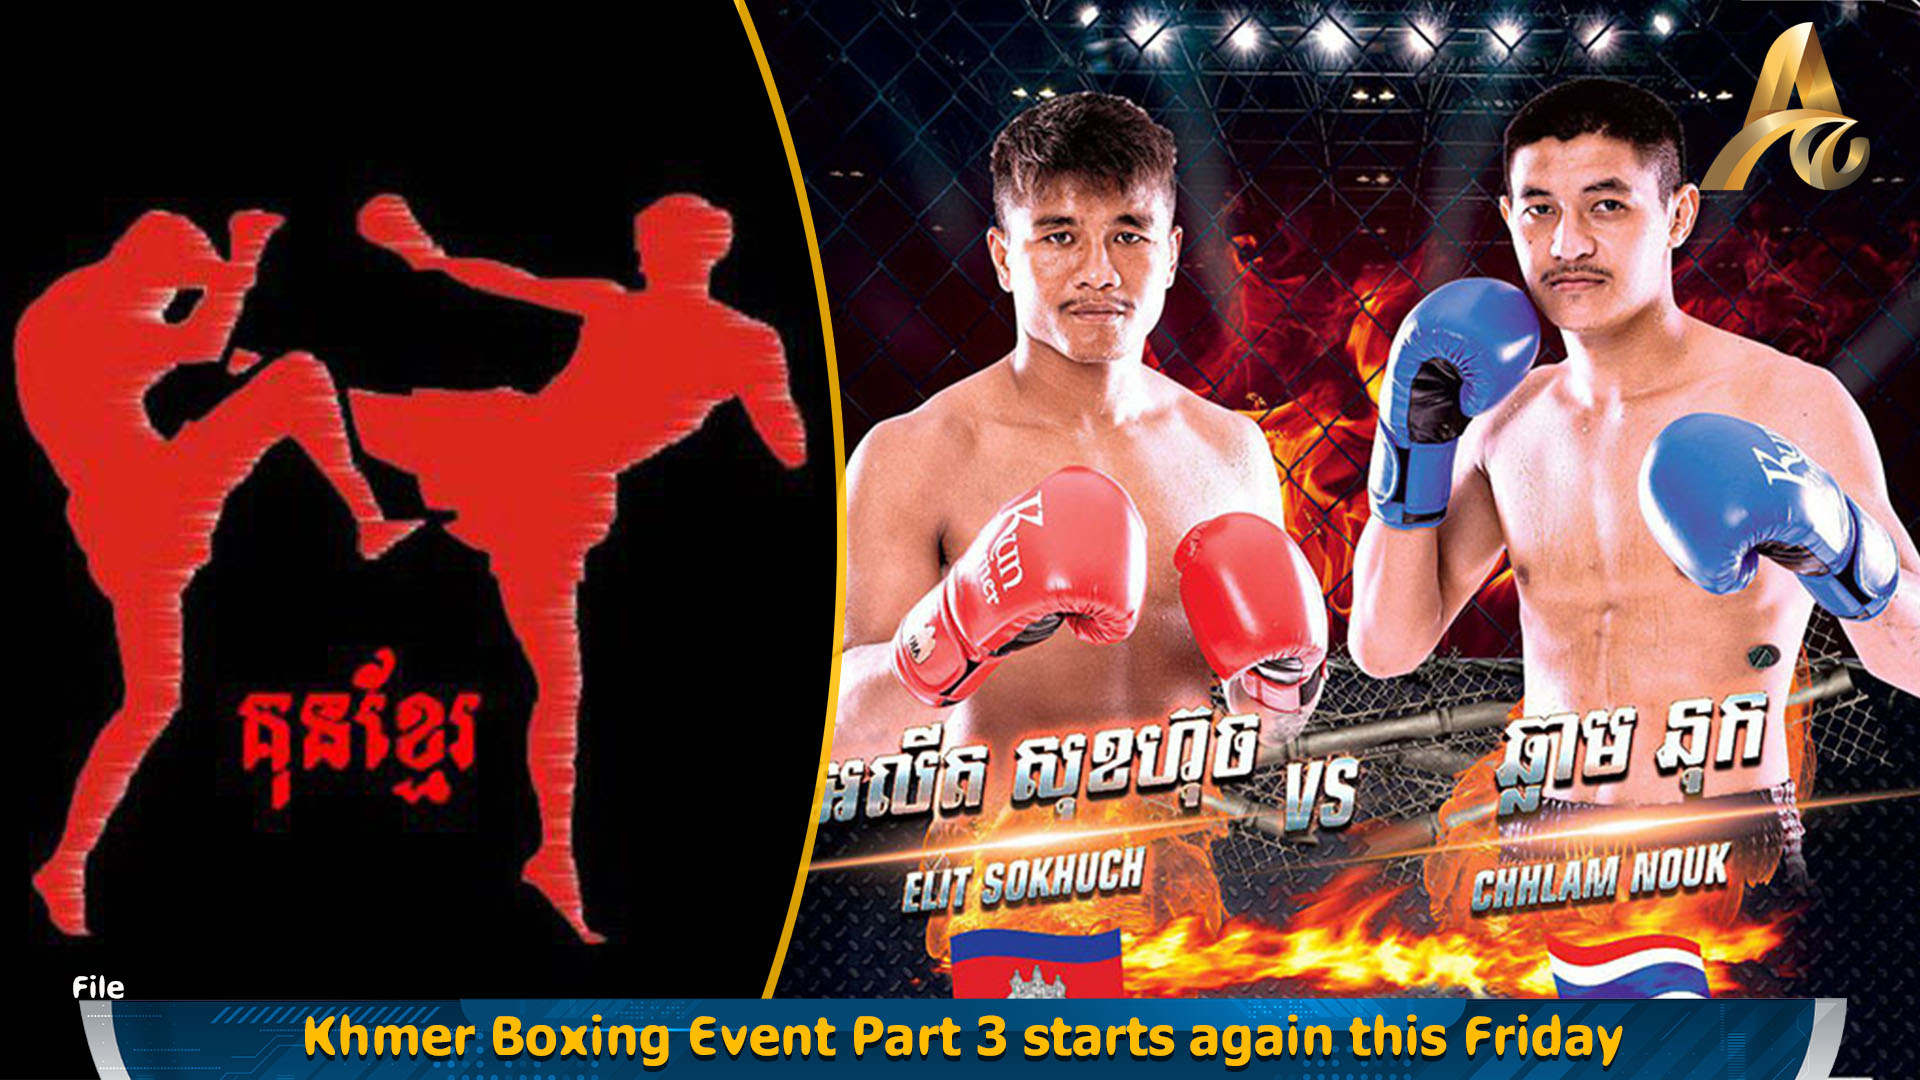 Khmer Boxing Event Part 3 starts again this Friday